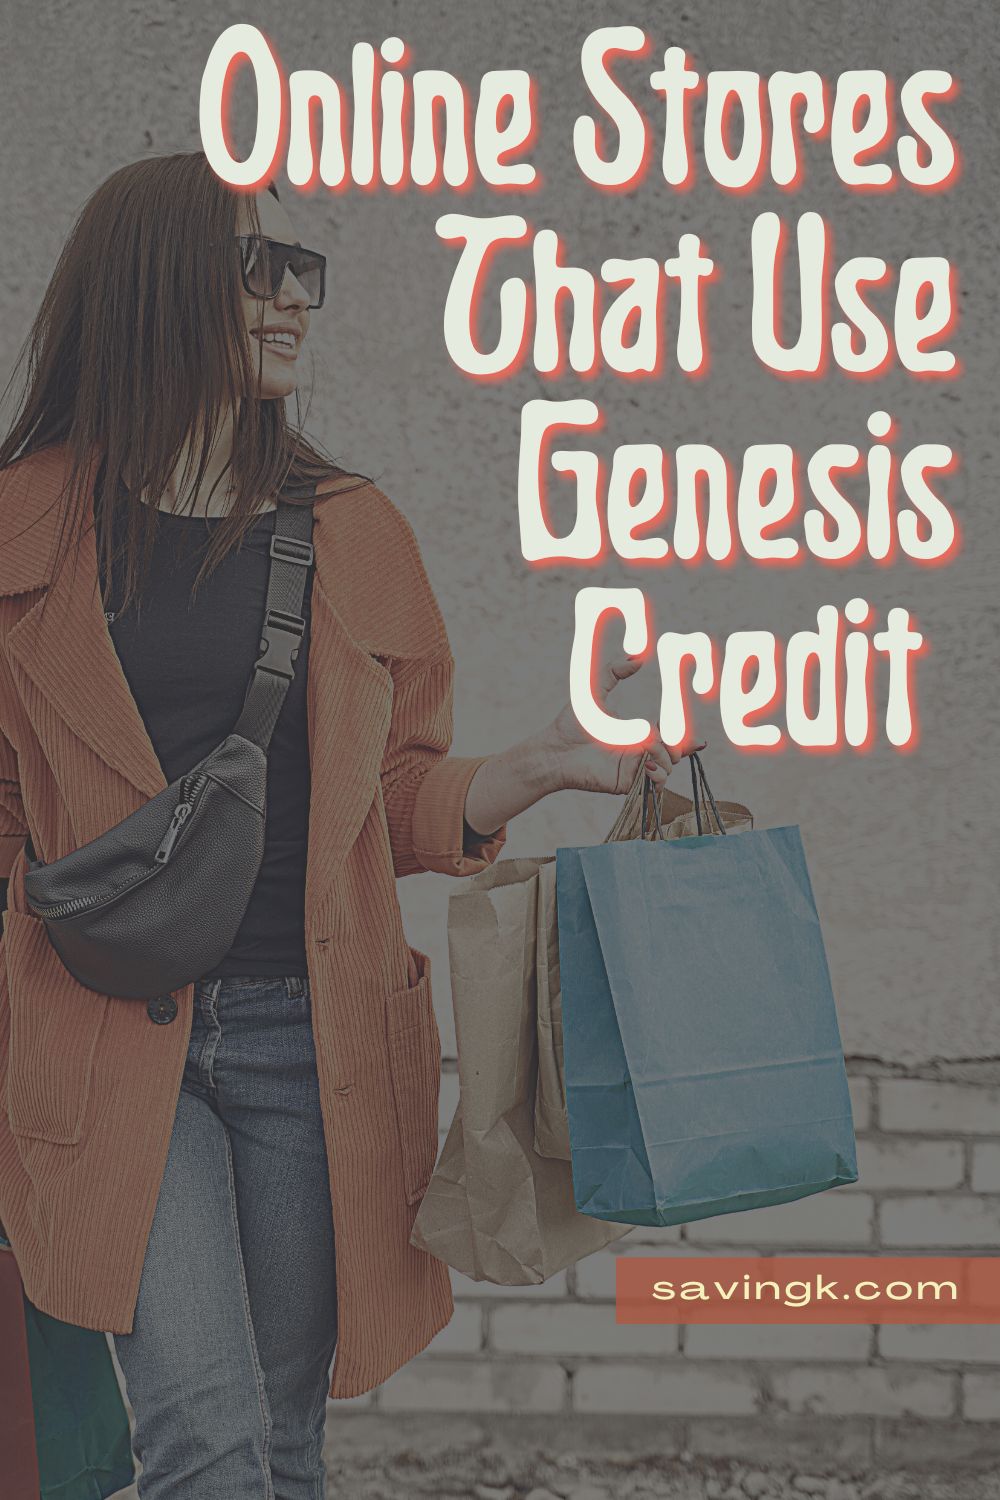 Online Stores That Use Genesis Credit